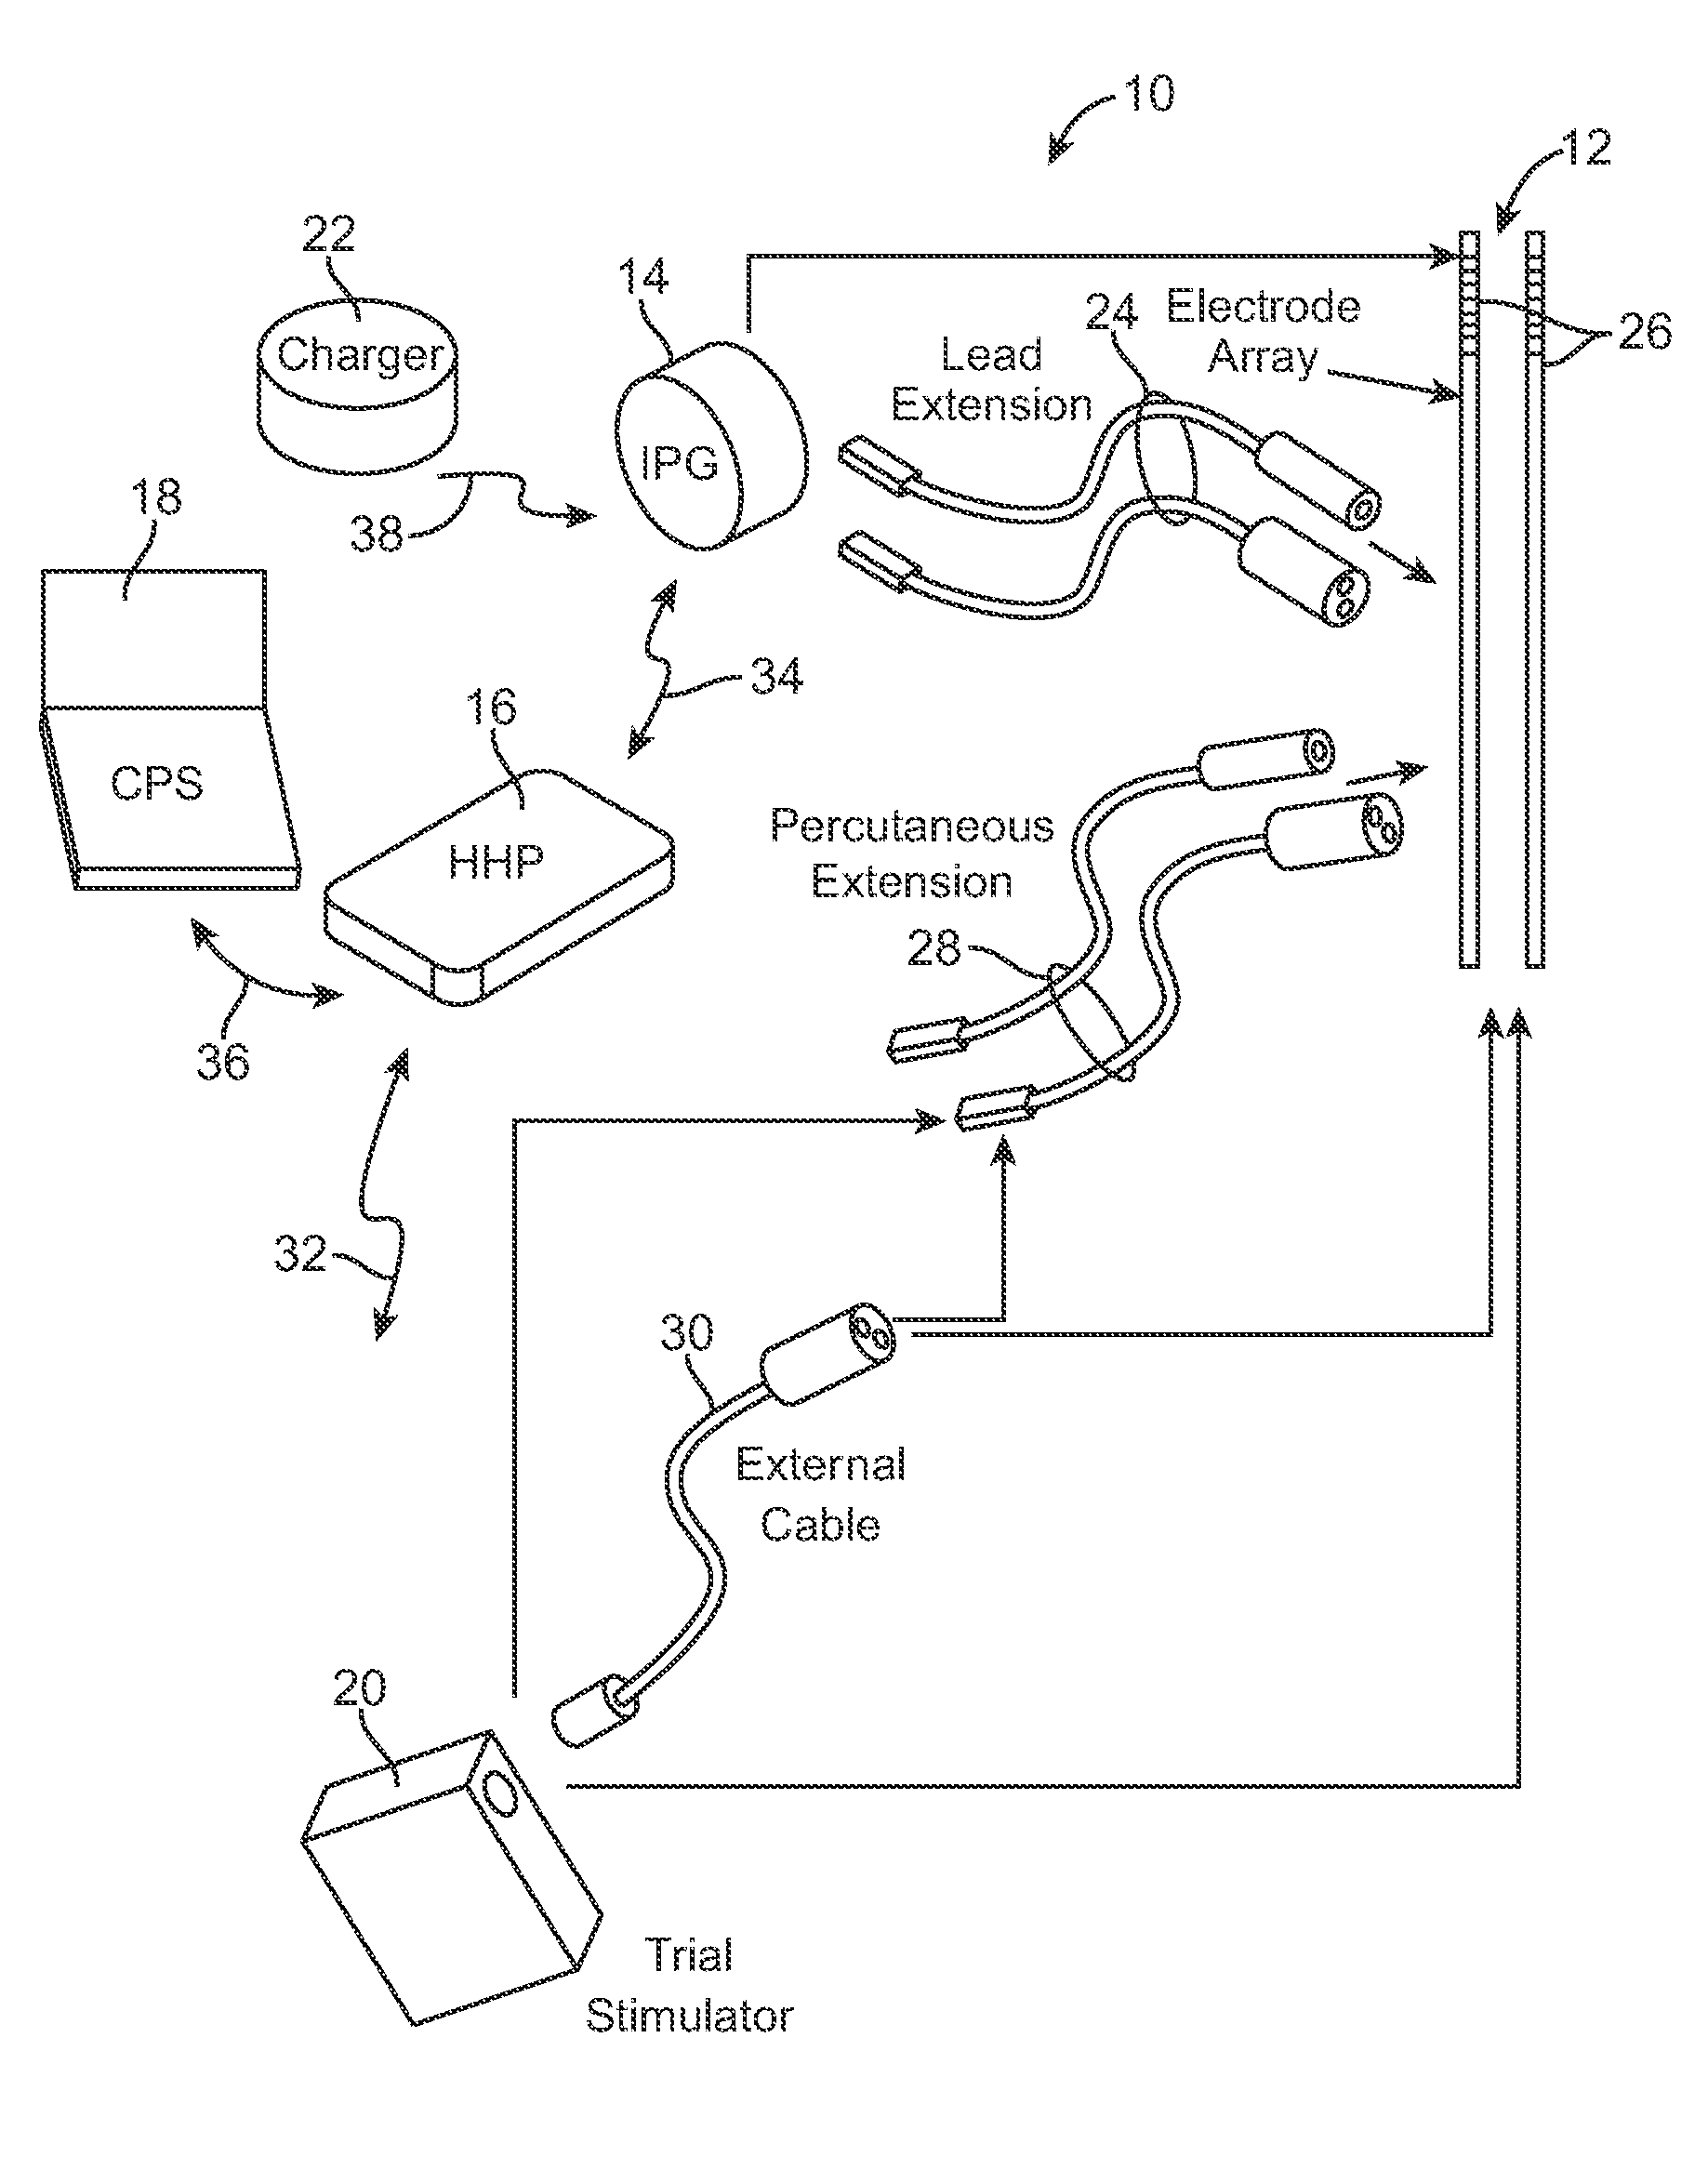 System and method for avoiding, reversing, and managing neurological accomodation to eletrical stimulation